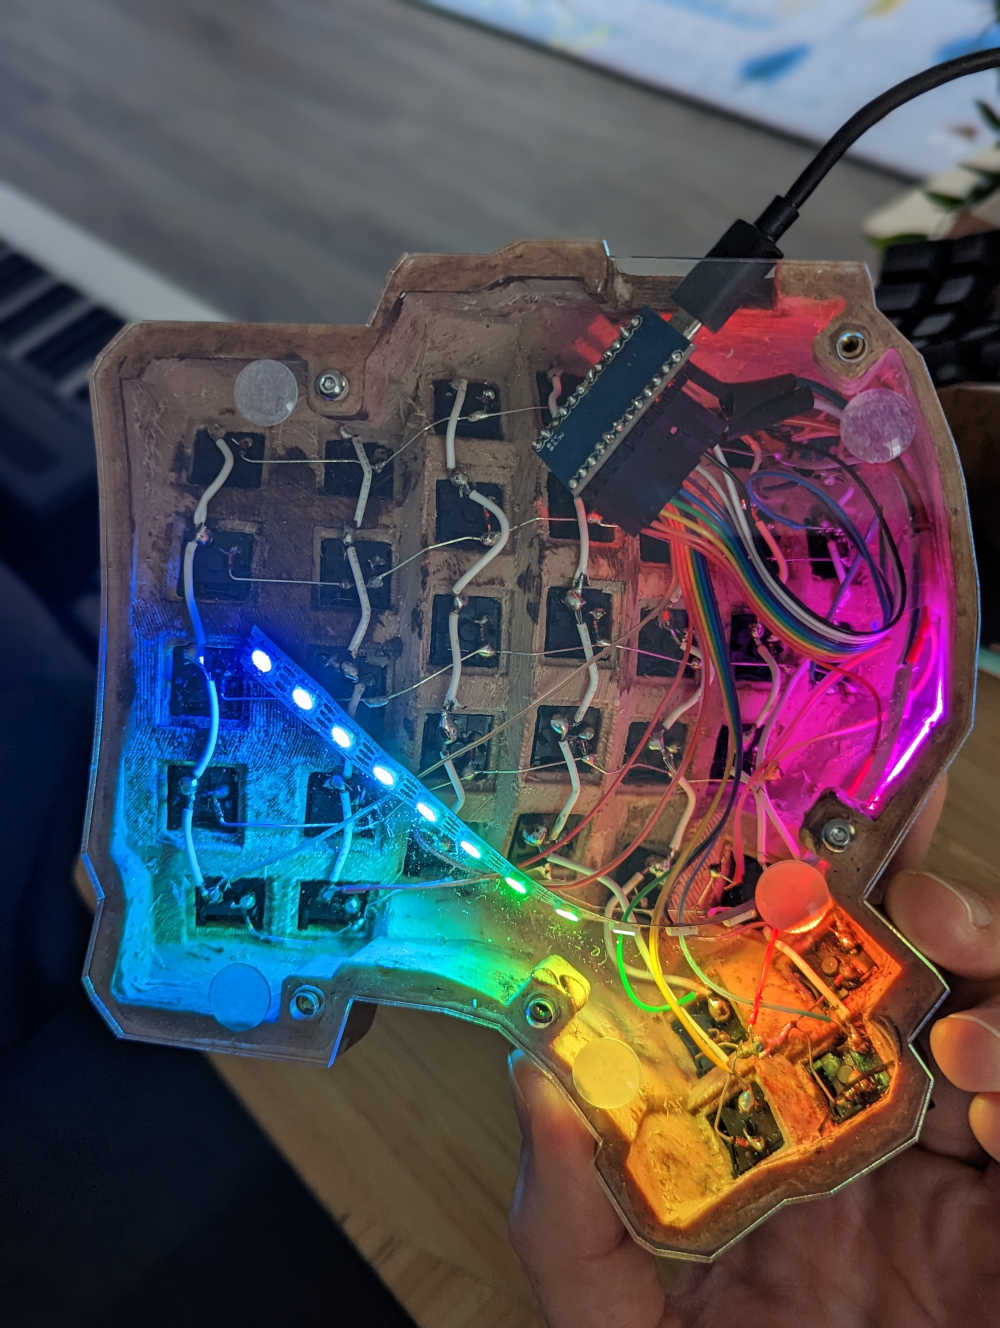 A keyboard half with a LED strip lit in rainbow colors